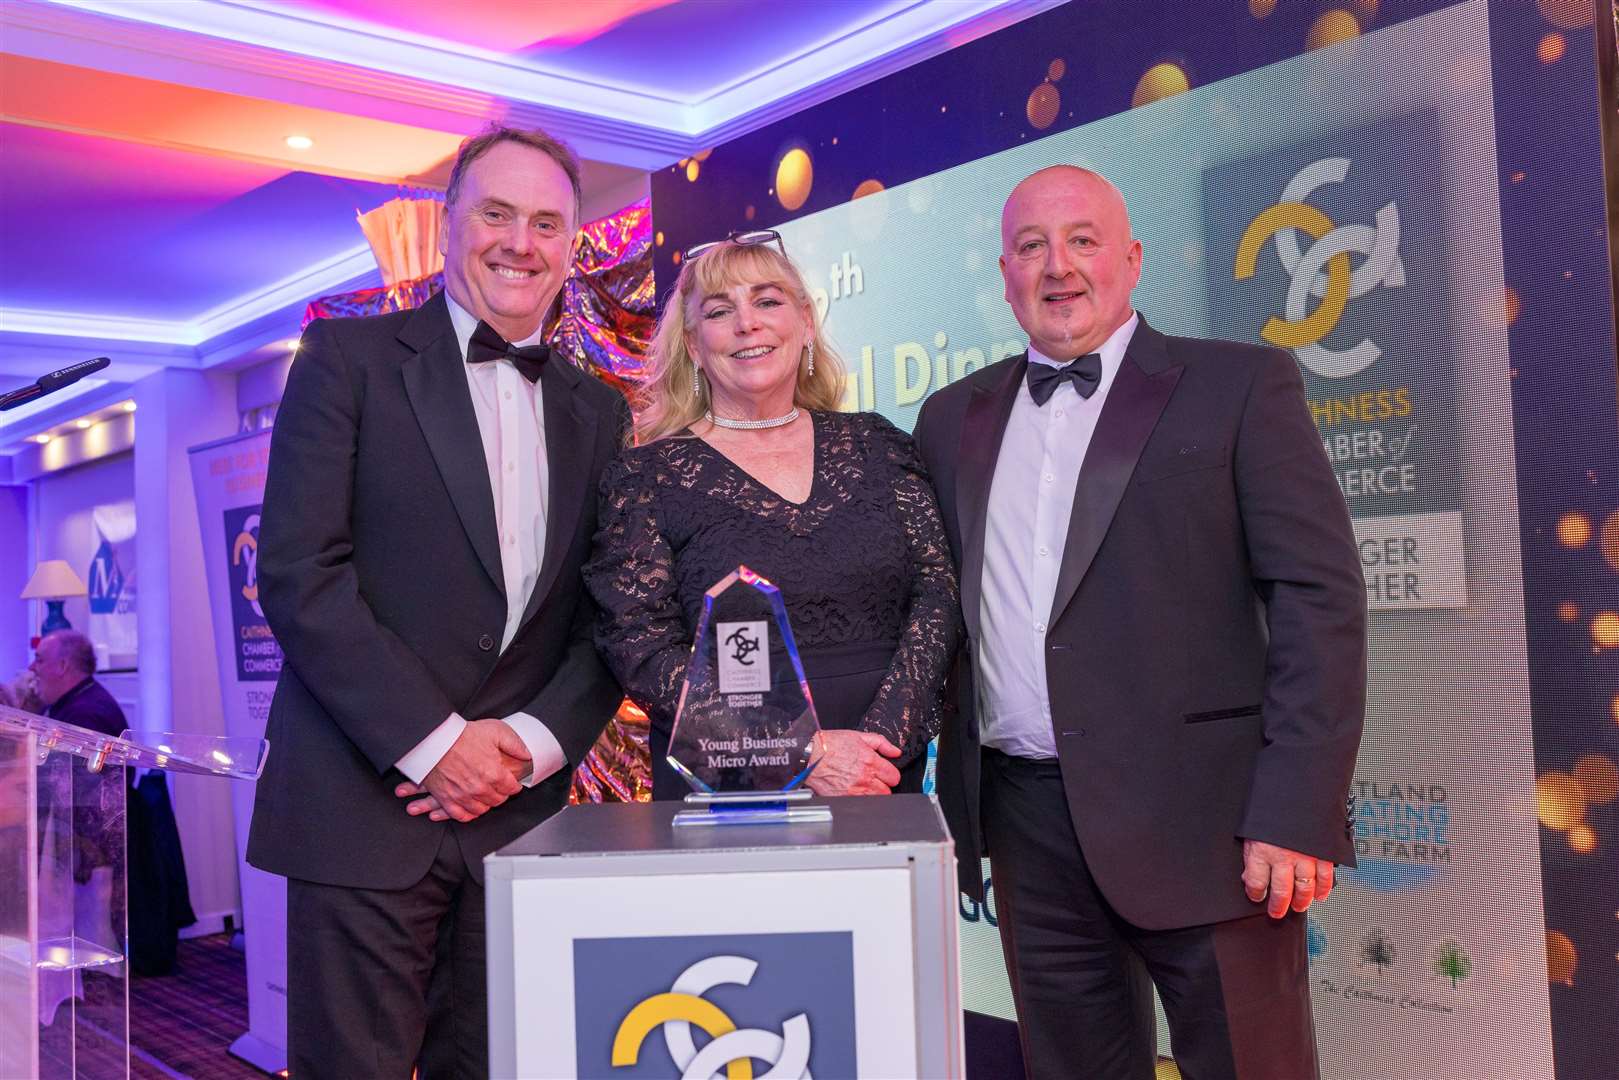 Mandy and Ged Boydell of CC Chocolatier, winners of the young business award in the Micro category, with Rob Heaton (left), of award sponsor West of Orkney Windfarm.